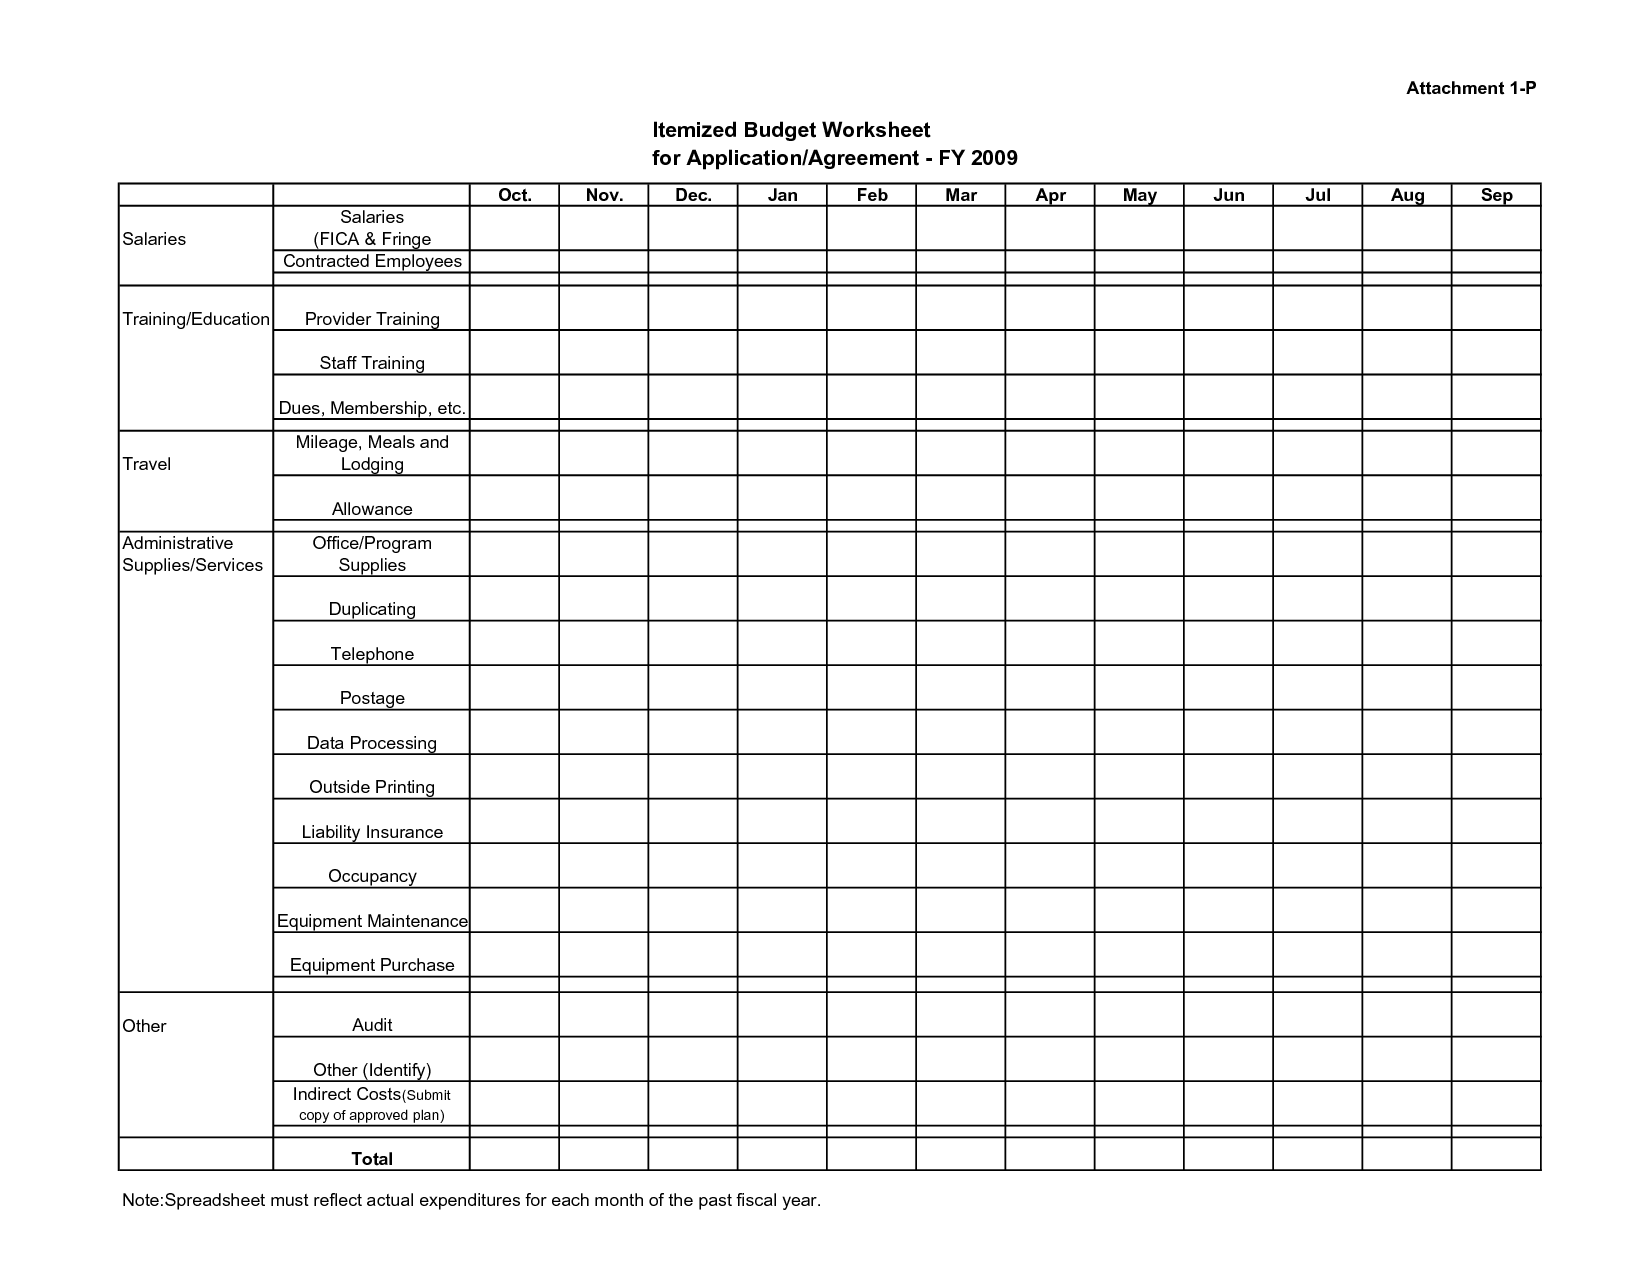 12 Best Images of Tax Deduction Worksheet 2014  Tax Itemized Deduction Worksheet, Completed 